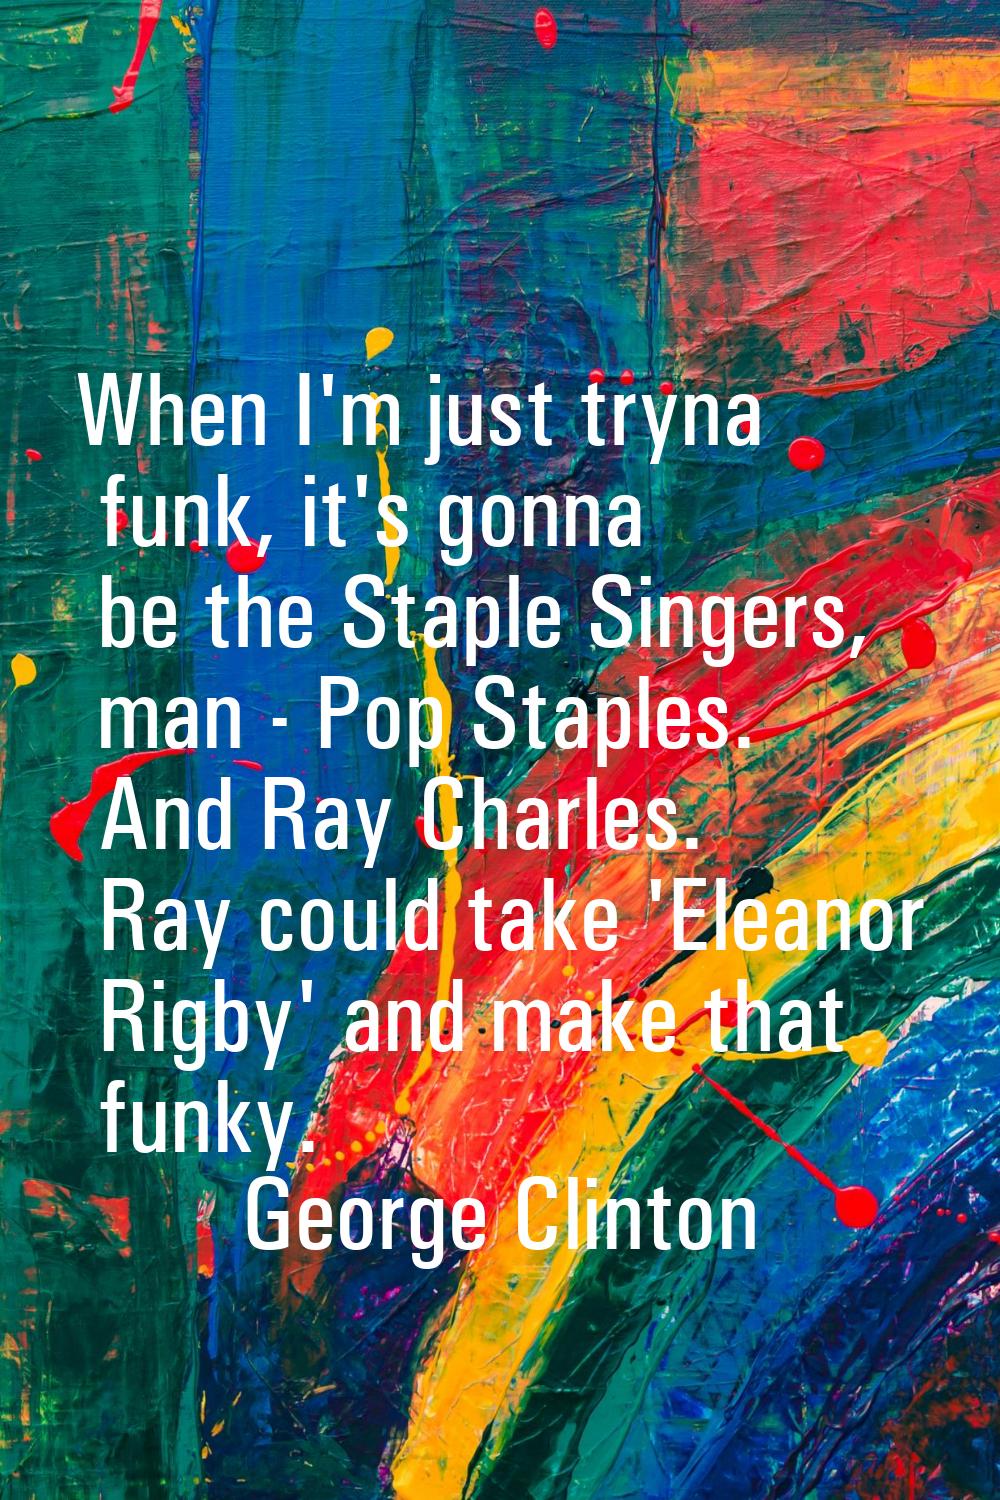 When I'm just tryna funk, it's gonna be the Staple Singers, man - Pop Staples. And Ray Charles. Ray